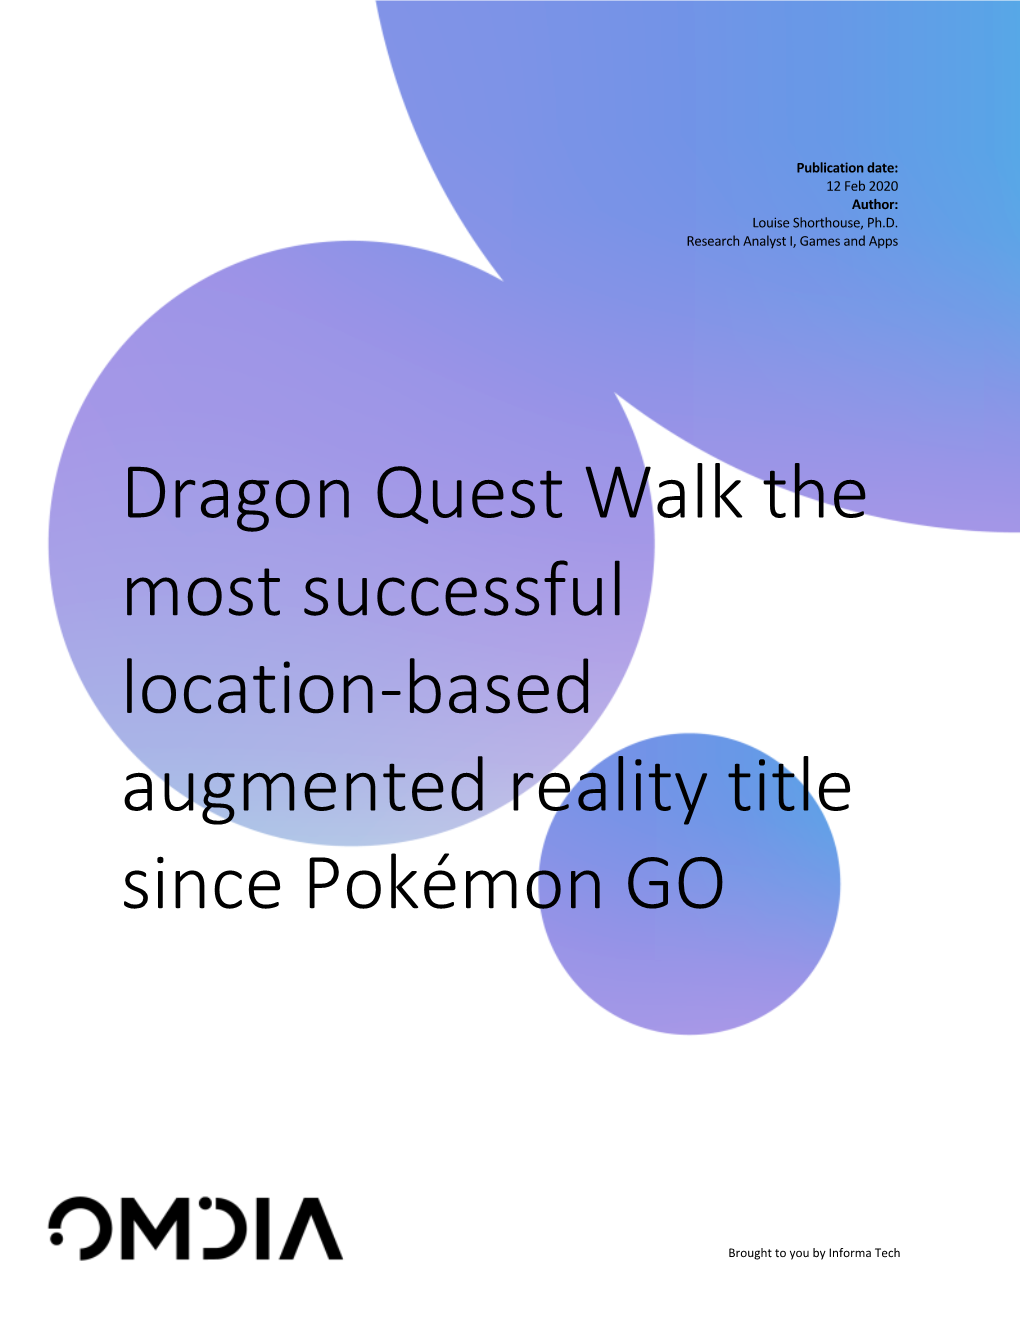 Dragon Quest Walk the Most Successful Location-Based Augmented Reality Title Since Pokémon GO